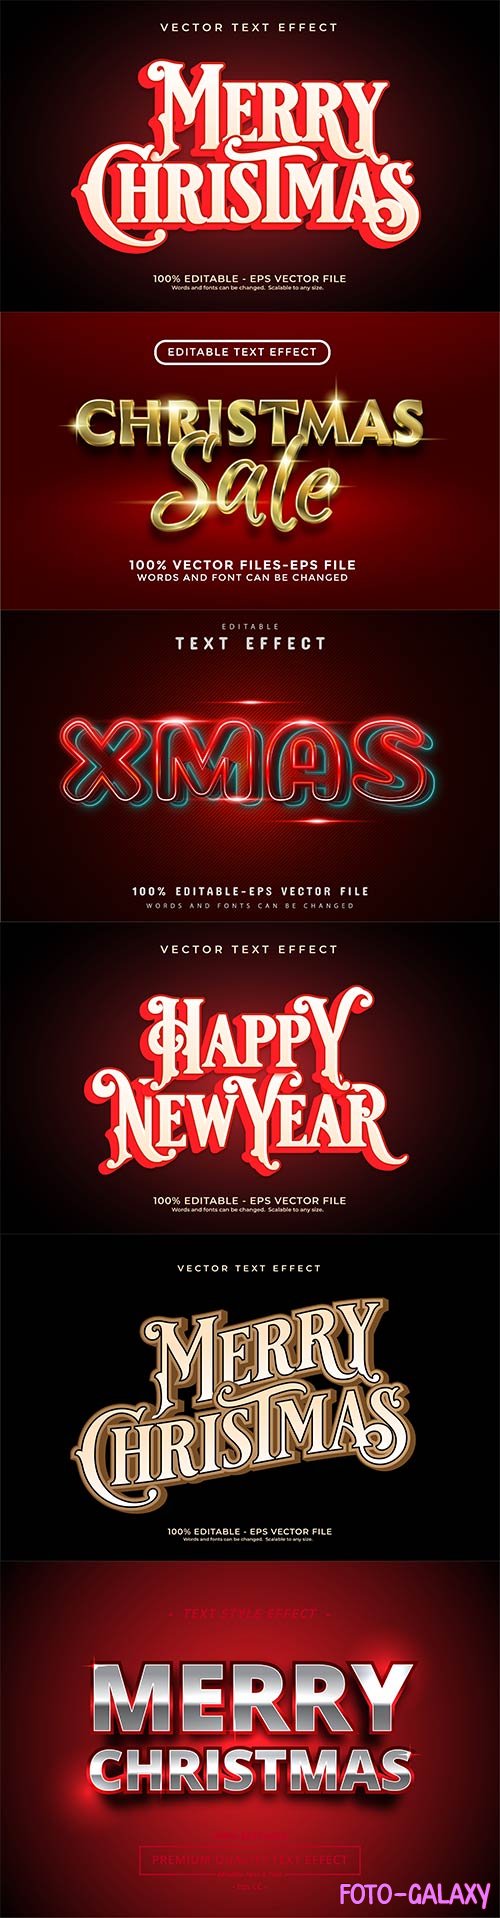 2022 New year and christmas editable text effect vector vol 23